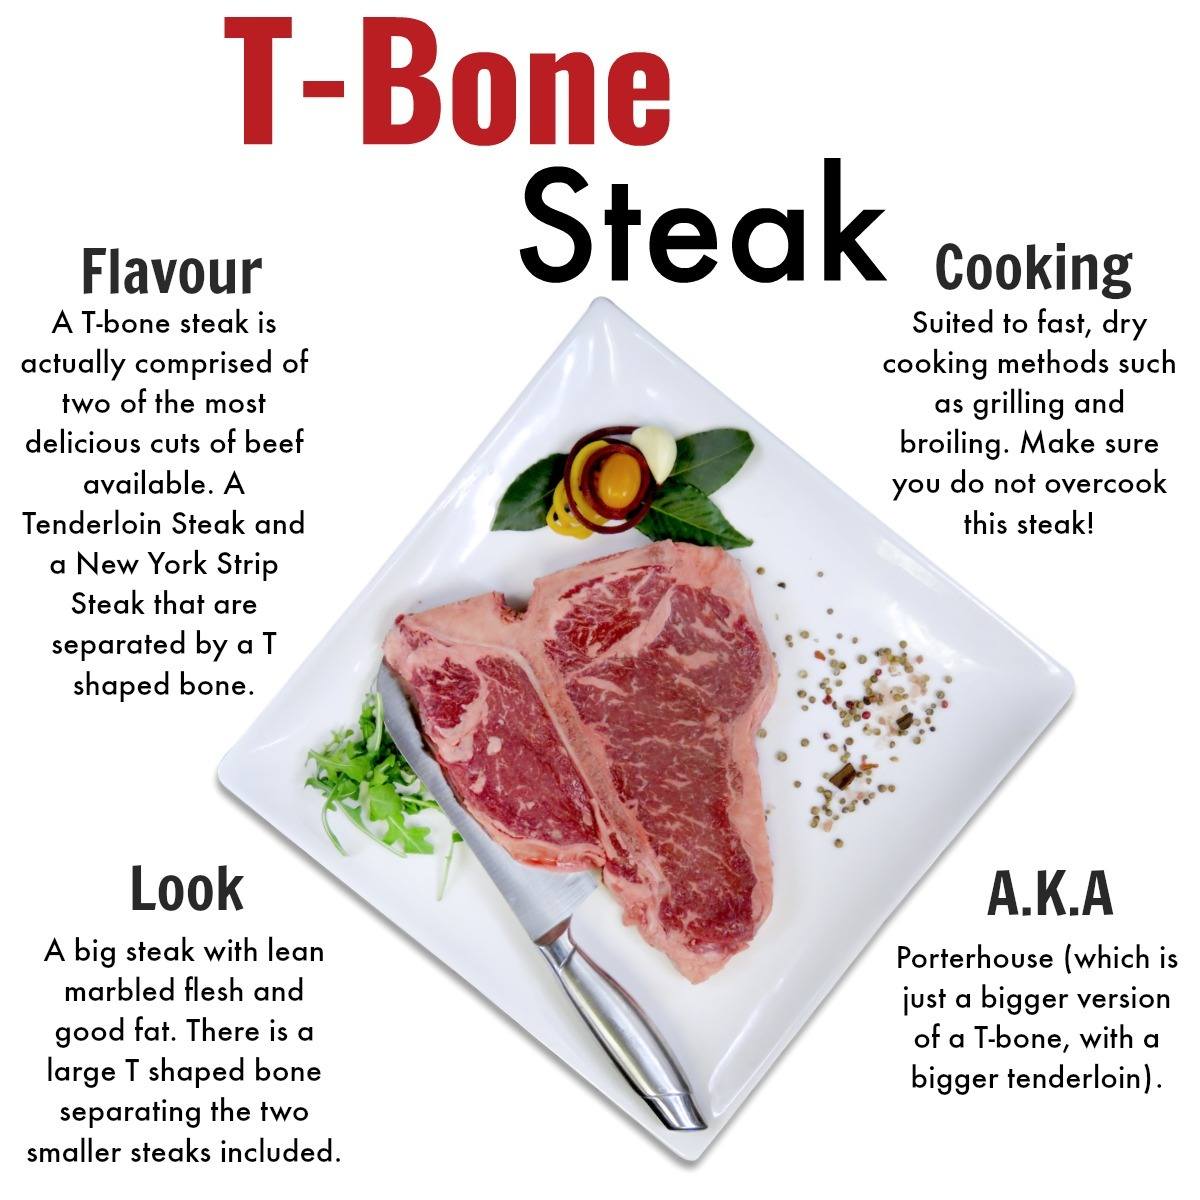 Affordable grass-fed beef delivery near me, steaks, ground beef and more - T-Bone Steak 2